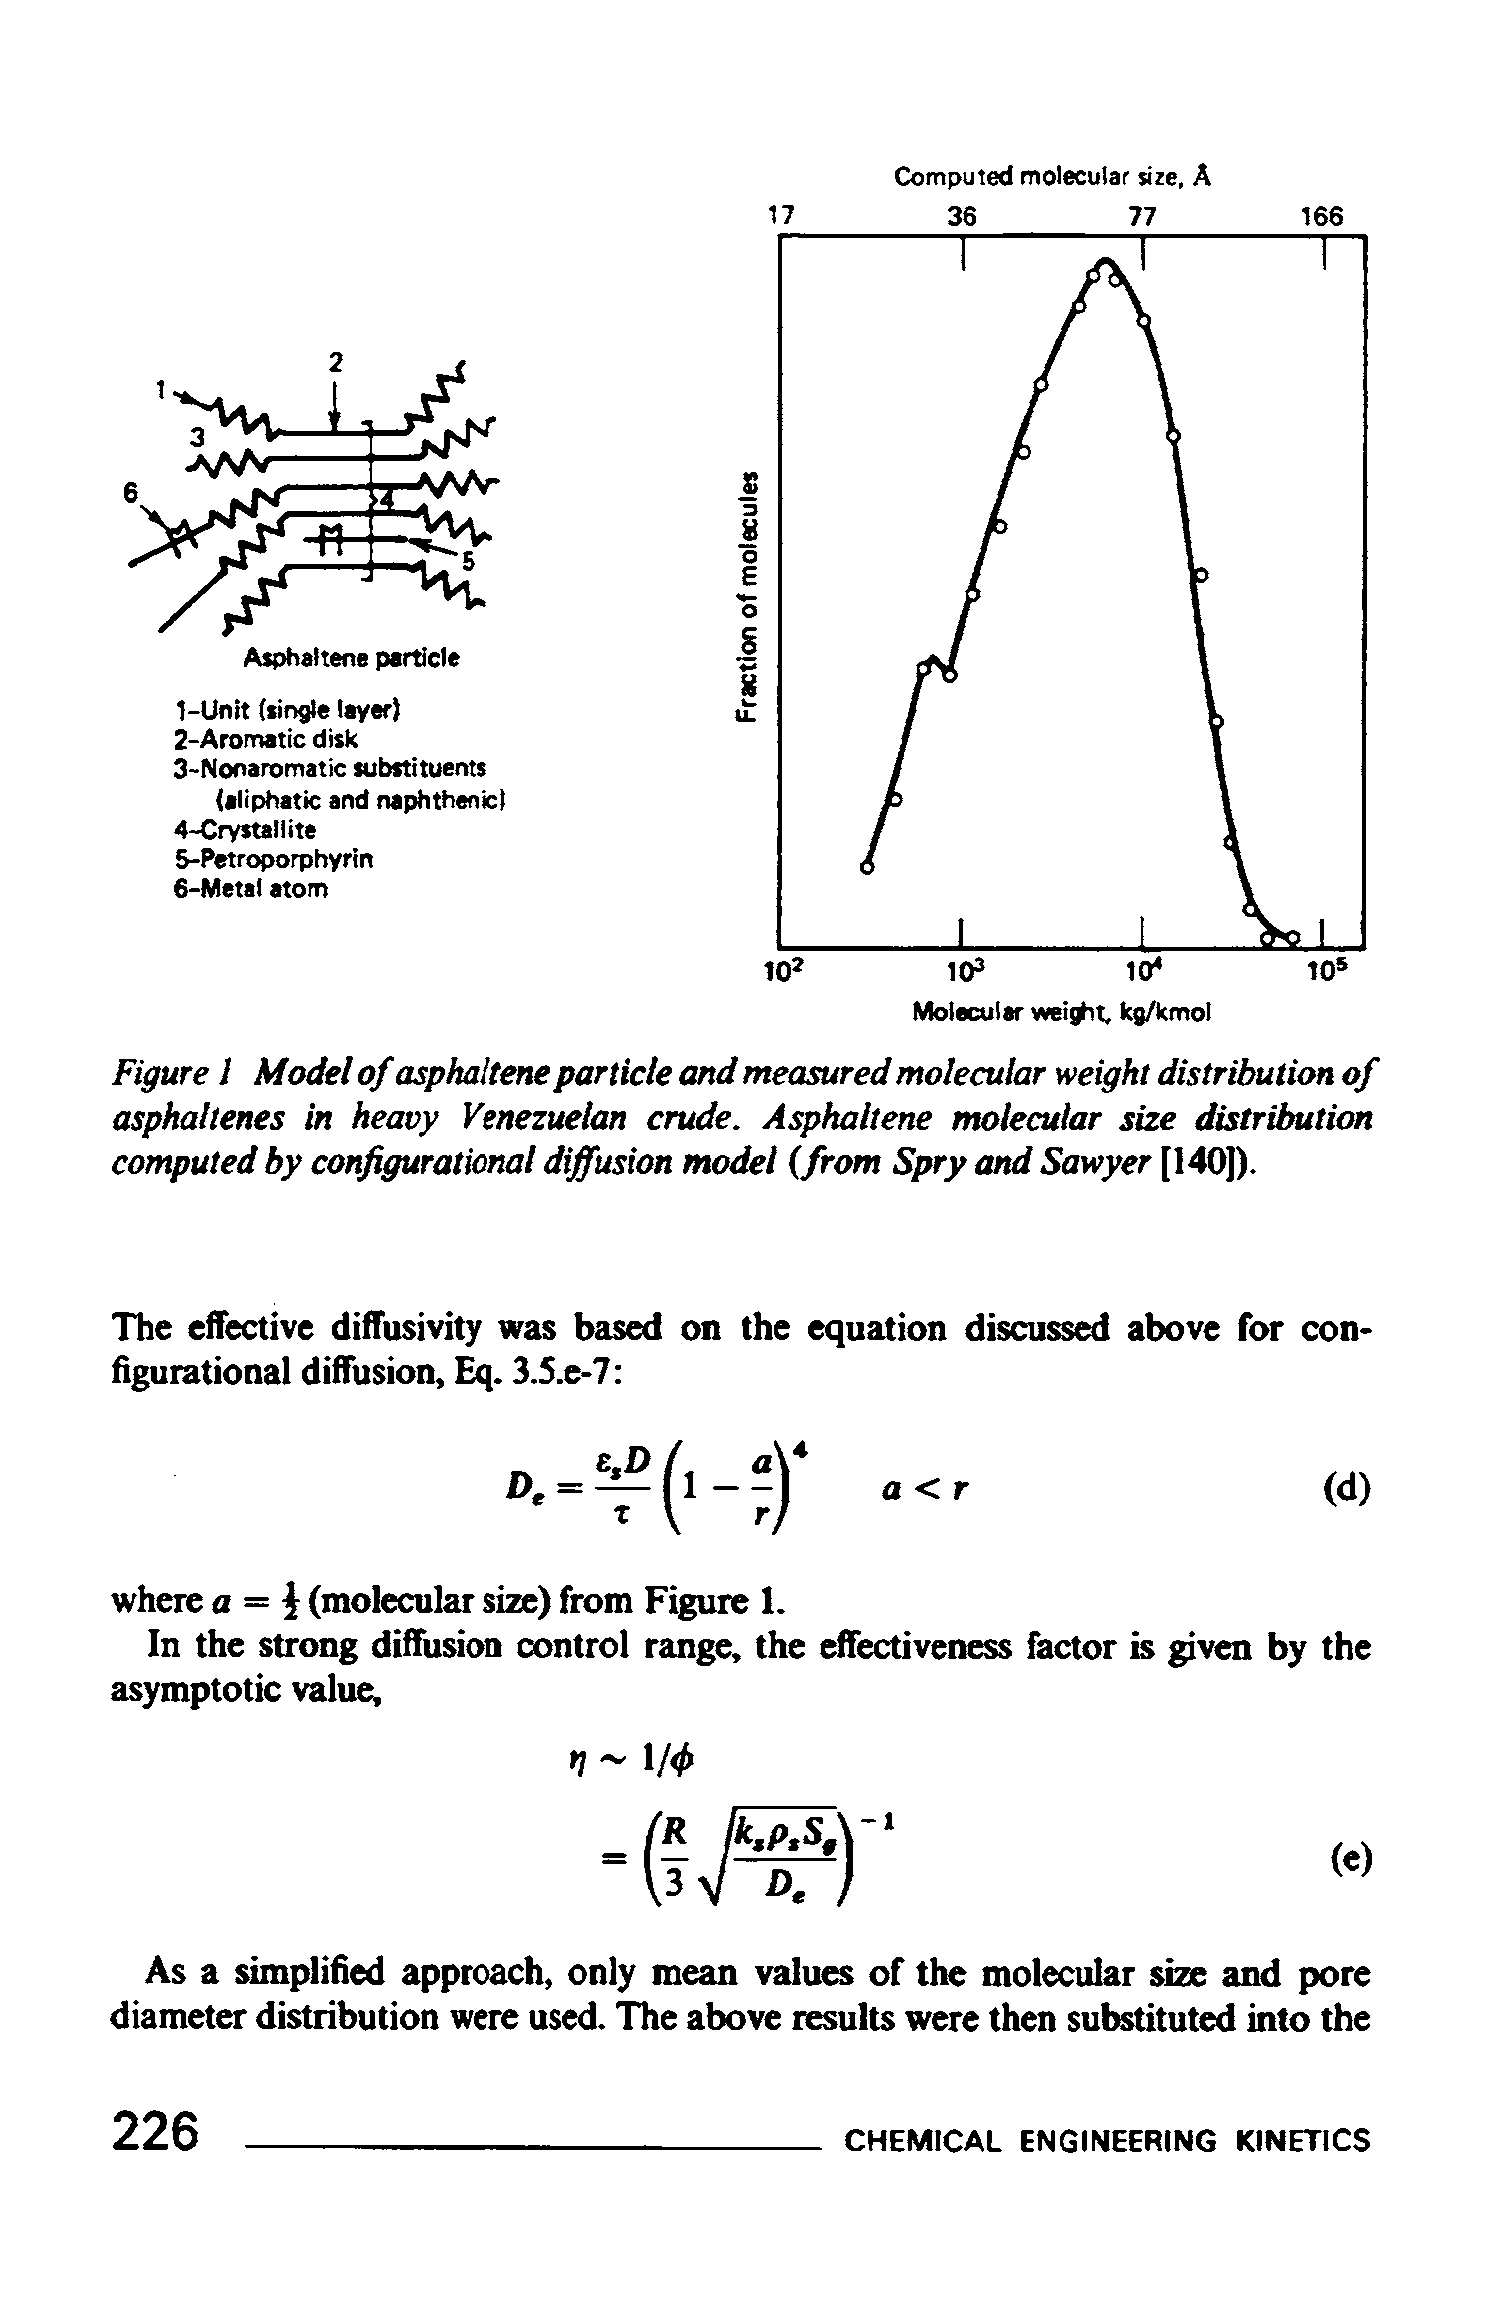 Figure I Model of asphaltene particle and measured molecular weight distribution of asphaltenes in heavy Venezuelan crude. Asphaltene molecular size distribution computed by configurational diffusion model (from Spry and Sawyer [I40p.